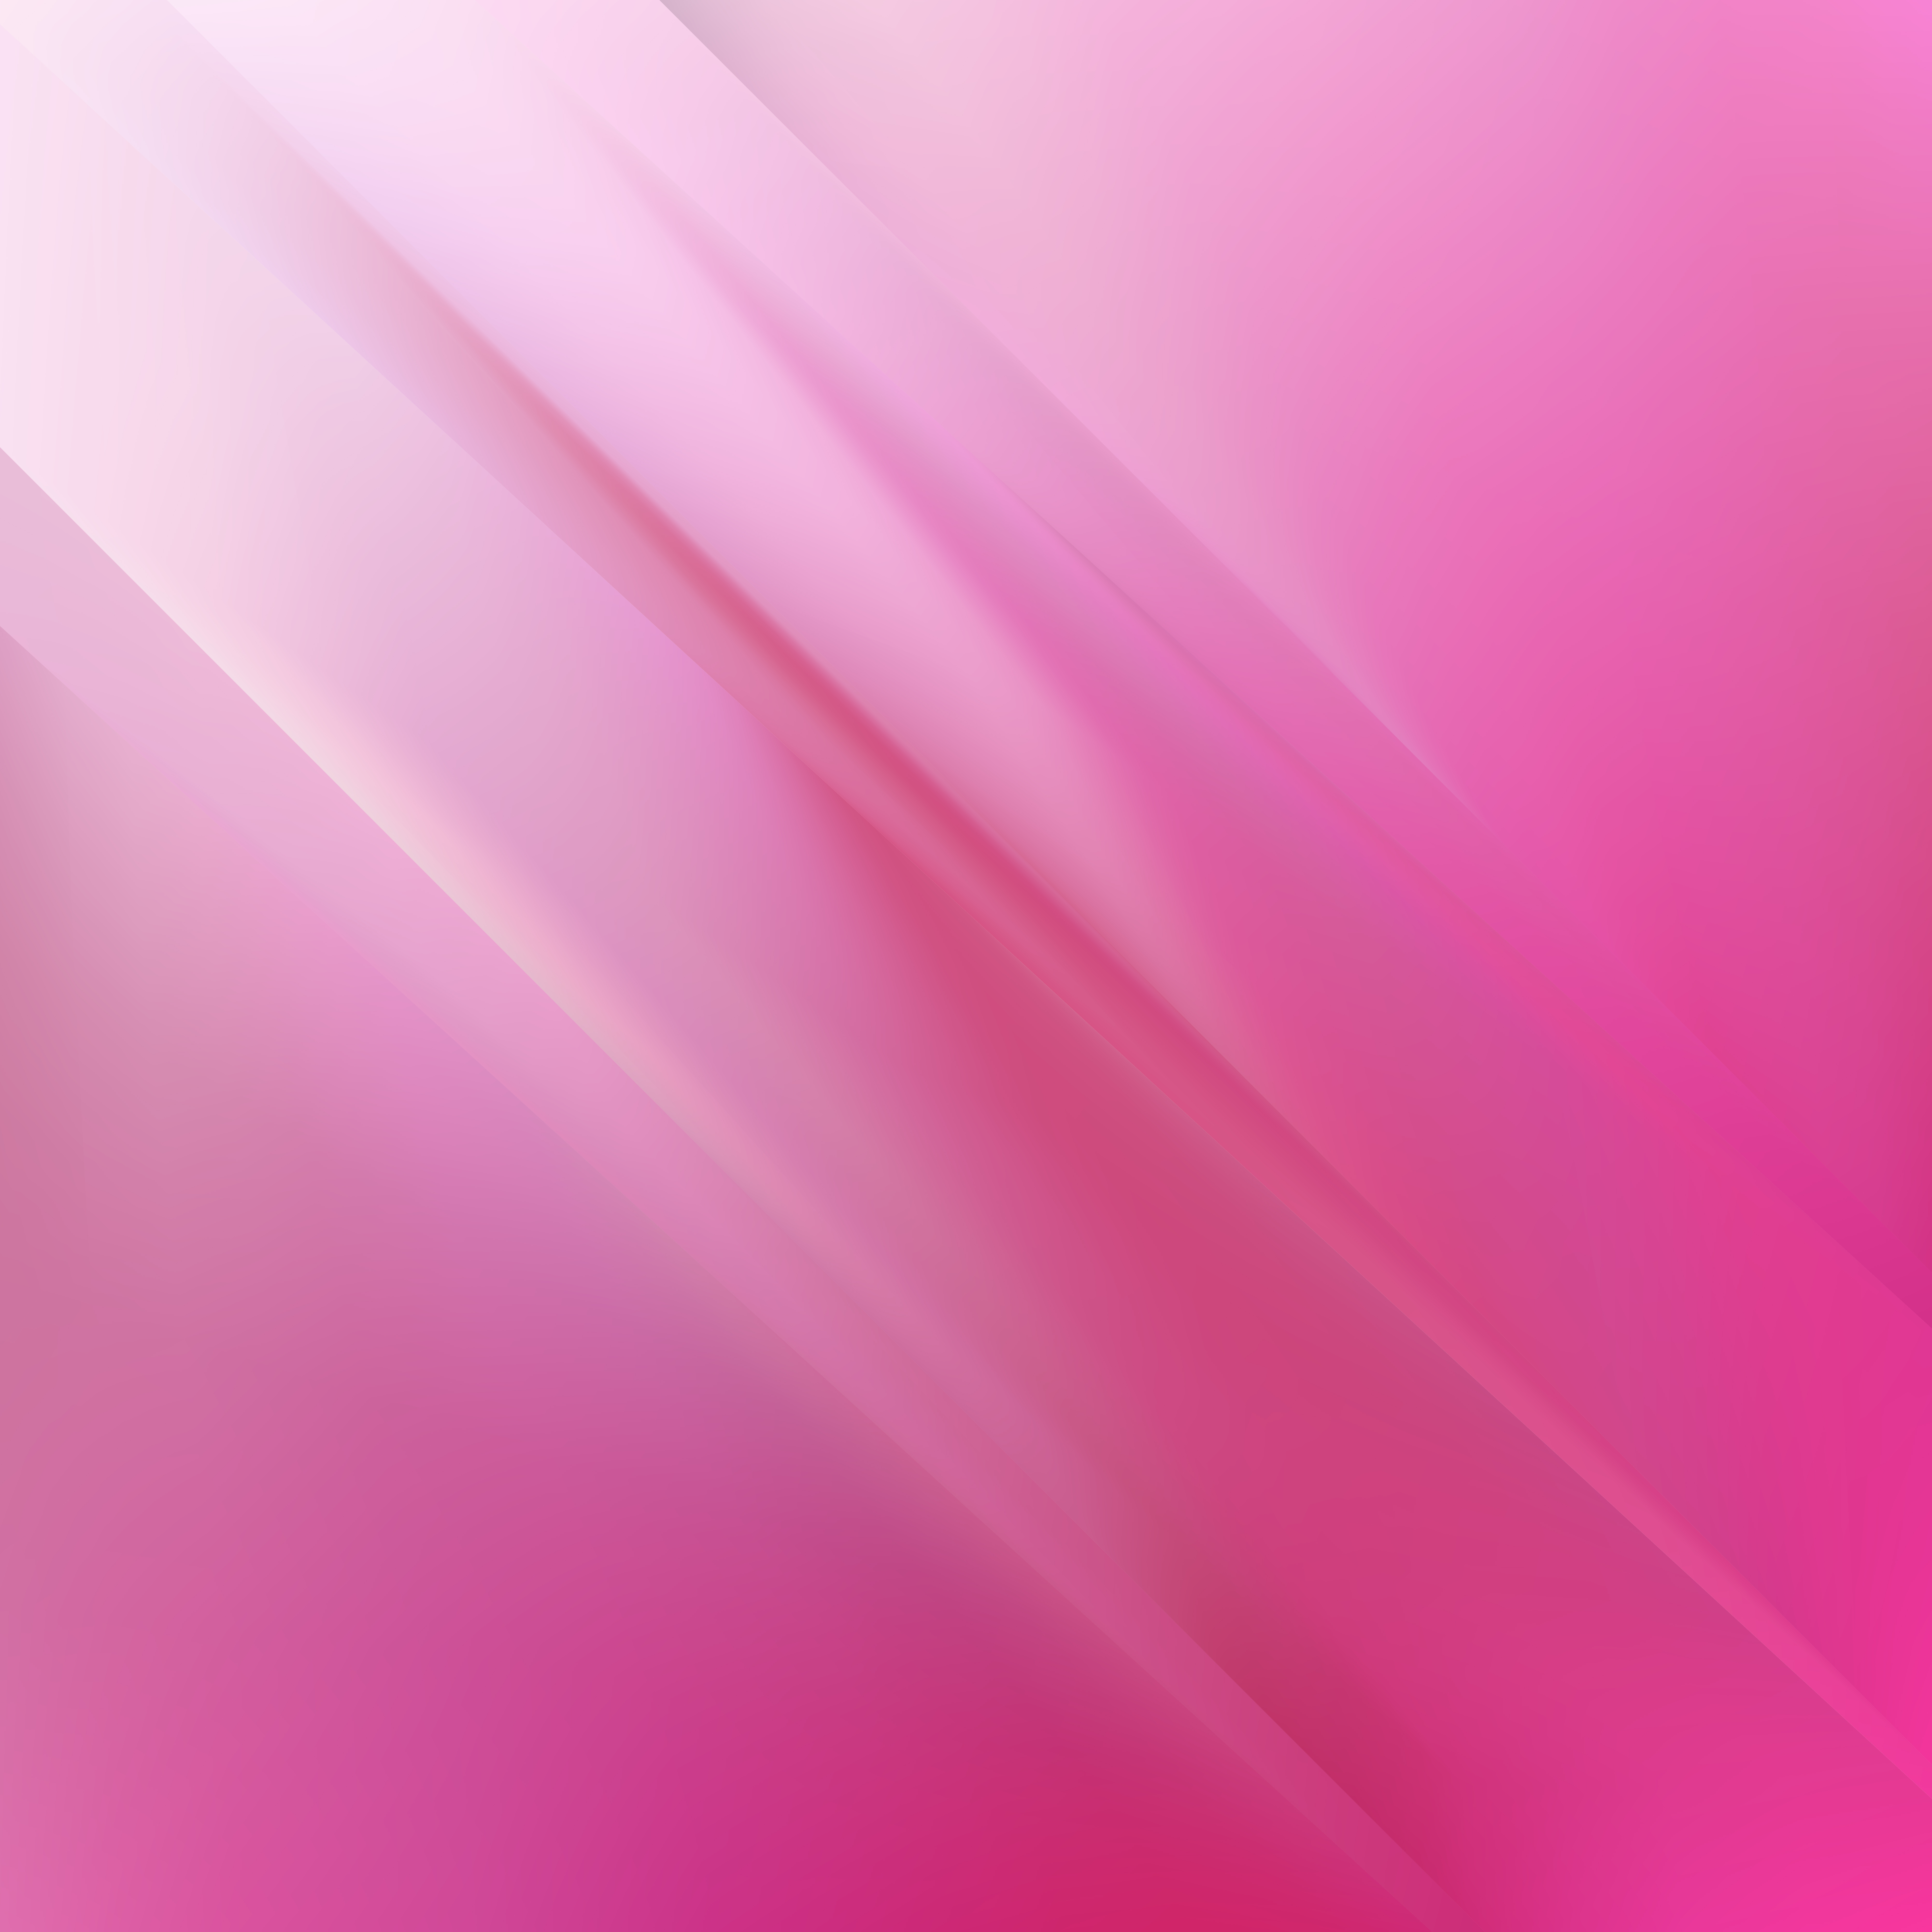 Free Abstract Pink Background Design